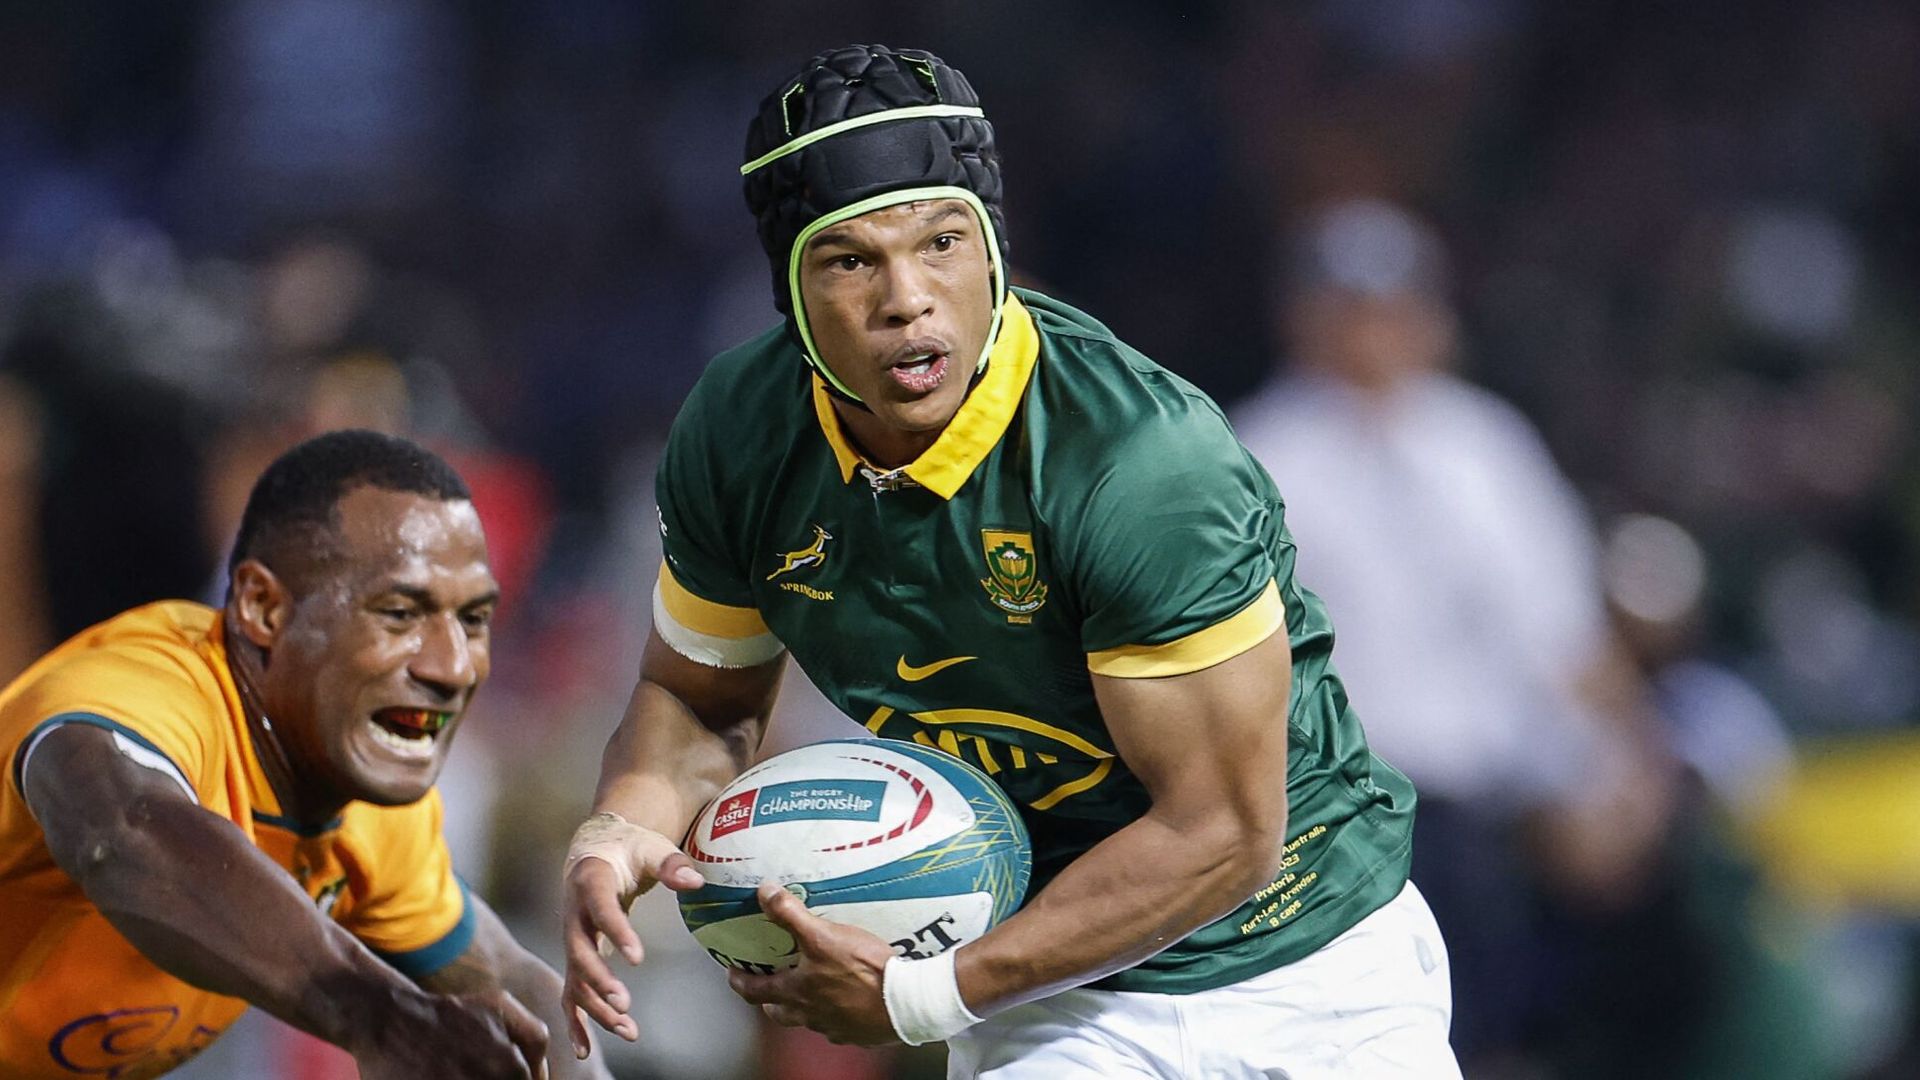 Arendse notches hat-trick as Springboks ease past Wallabies